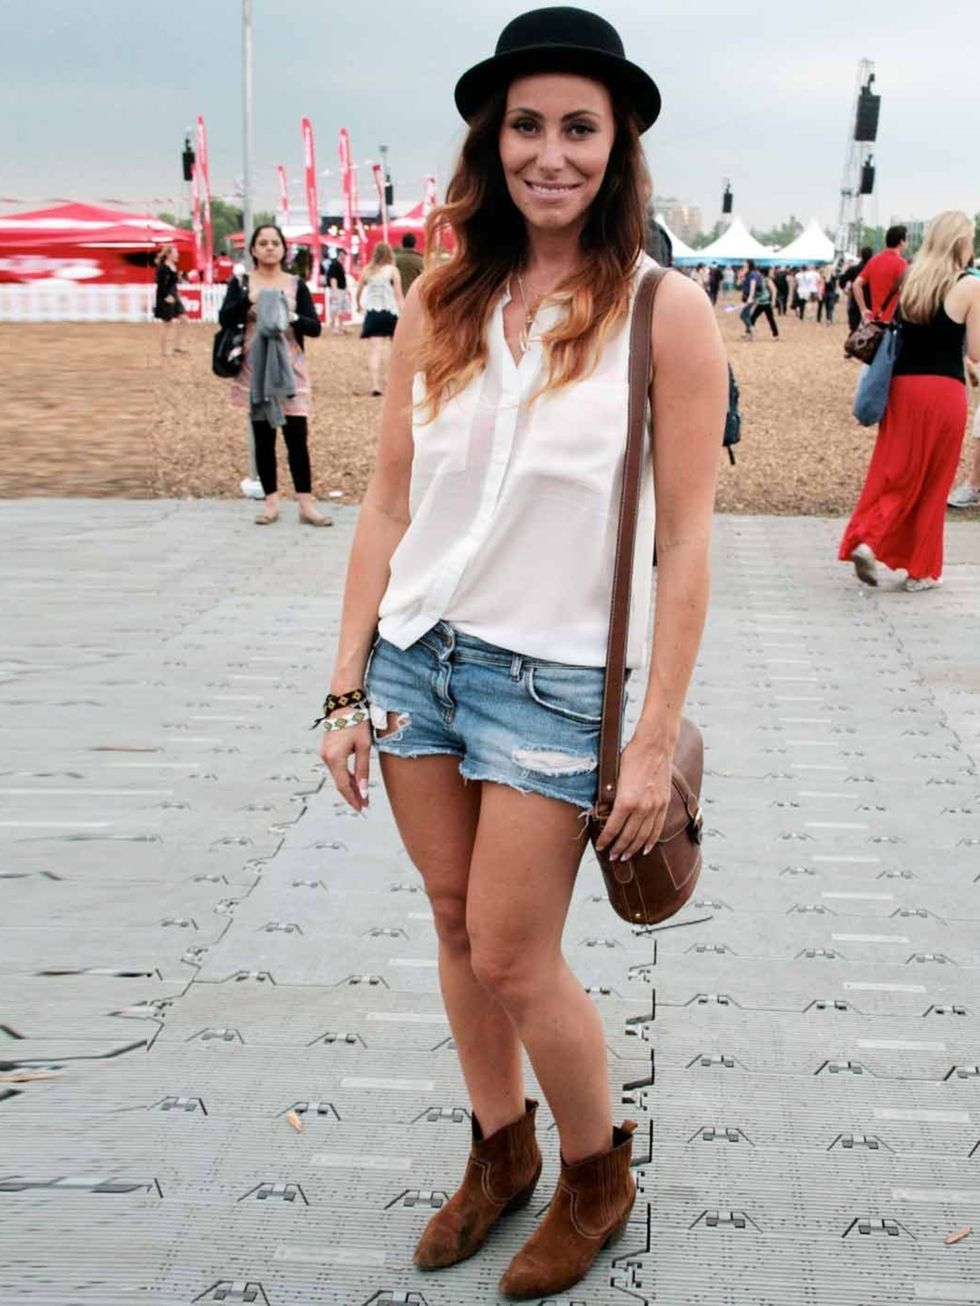 <p>Jane Grogan, 34, Health and Fitness Professional. H &amp; M top, bag and hat, Topshop shorts, Dune boots, custom made necklace.</p>